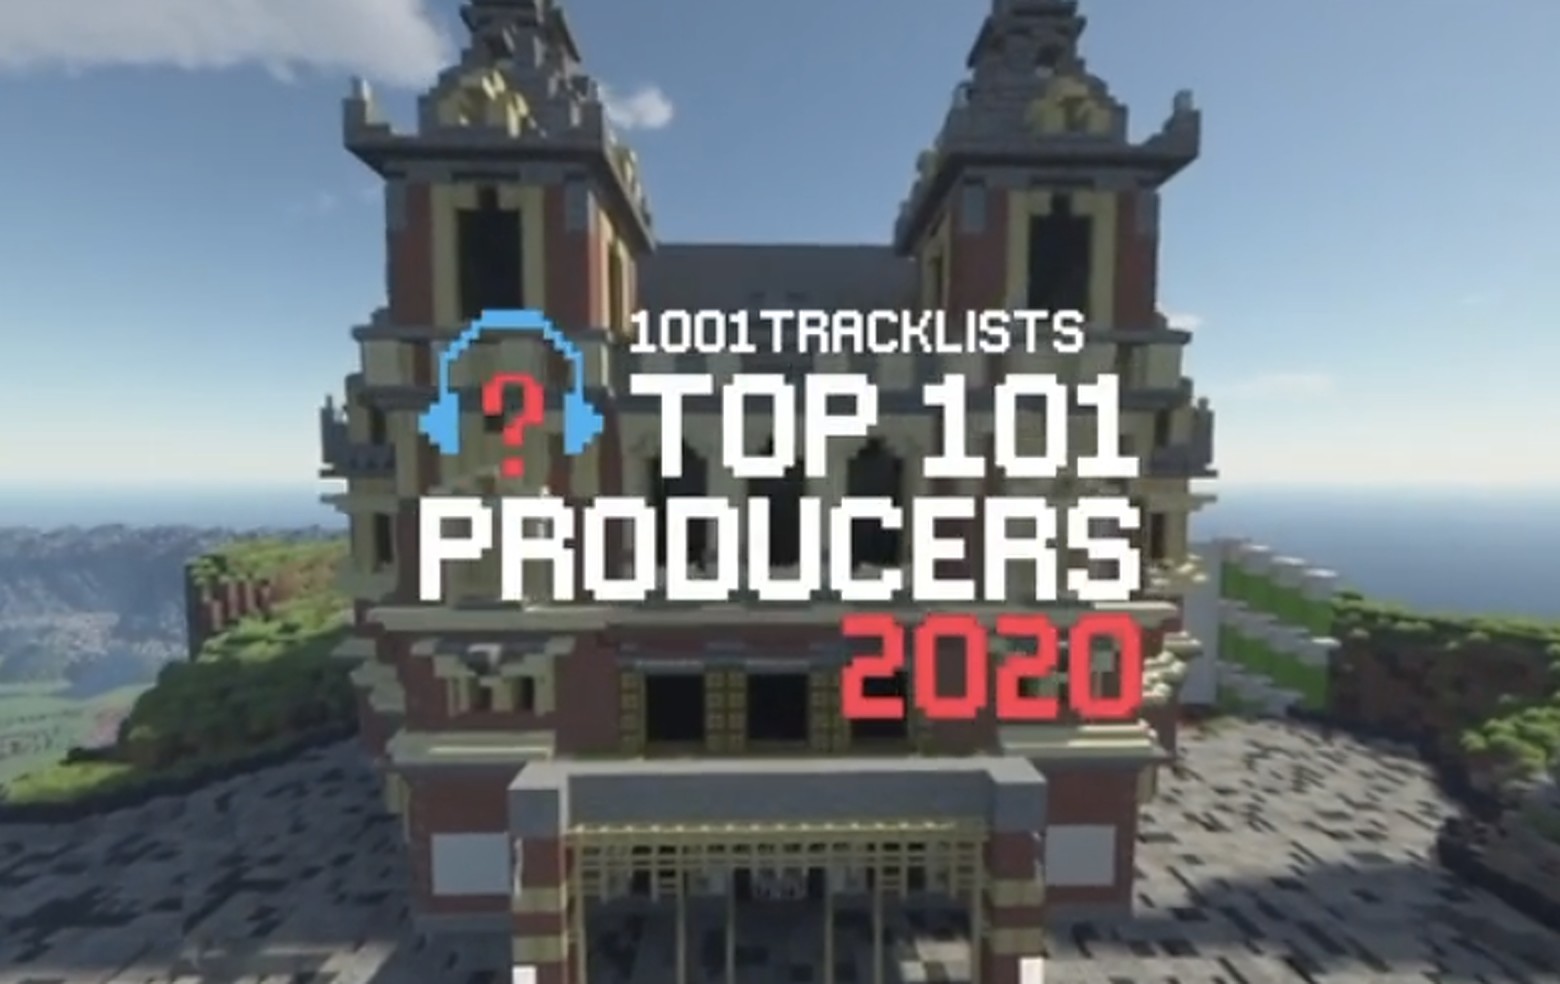 1001tracklists Releases Lineup For Top 101 Producers Minecraft Celebration Edm Identity The world's leading dj tracklist database. 1001tracklists releases lineup for top